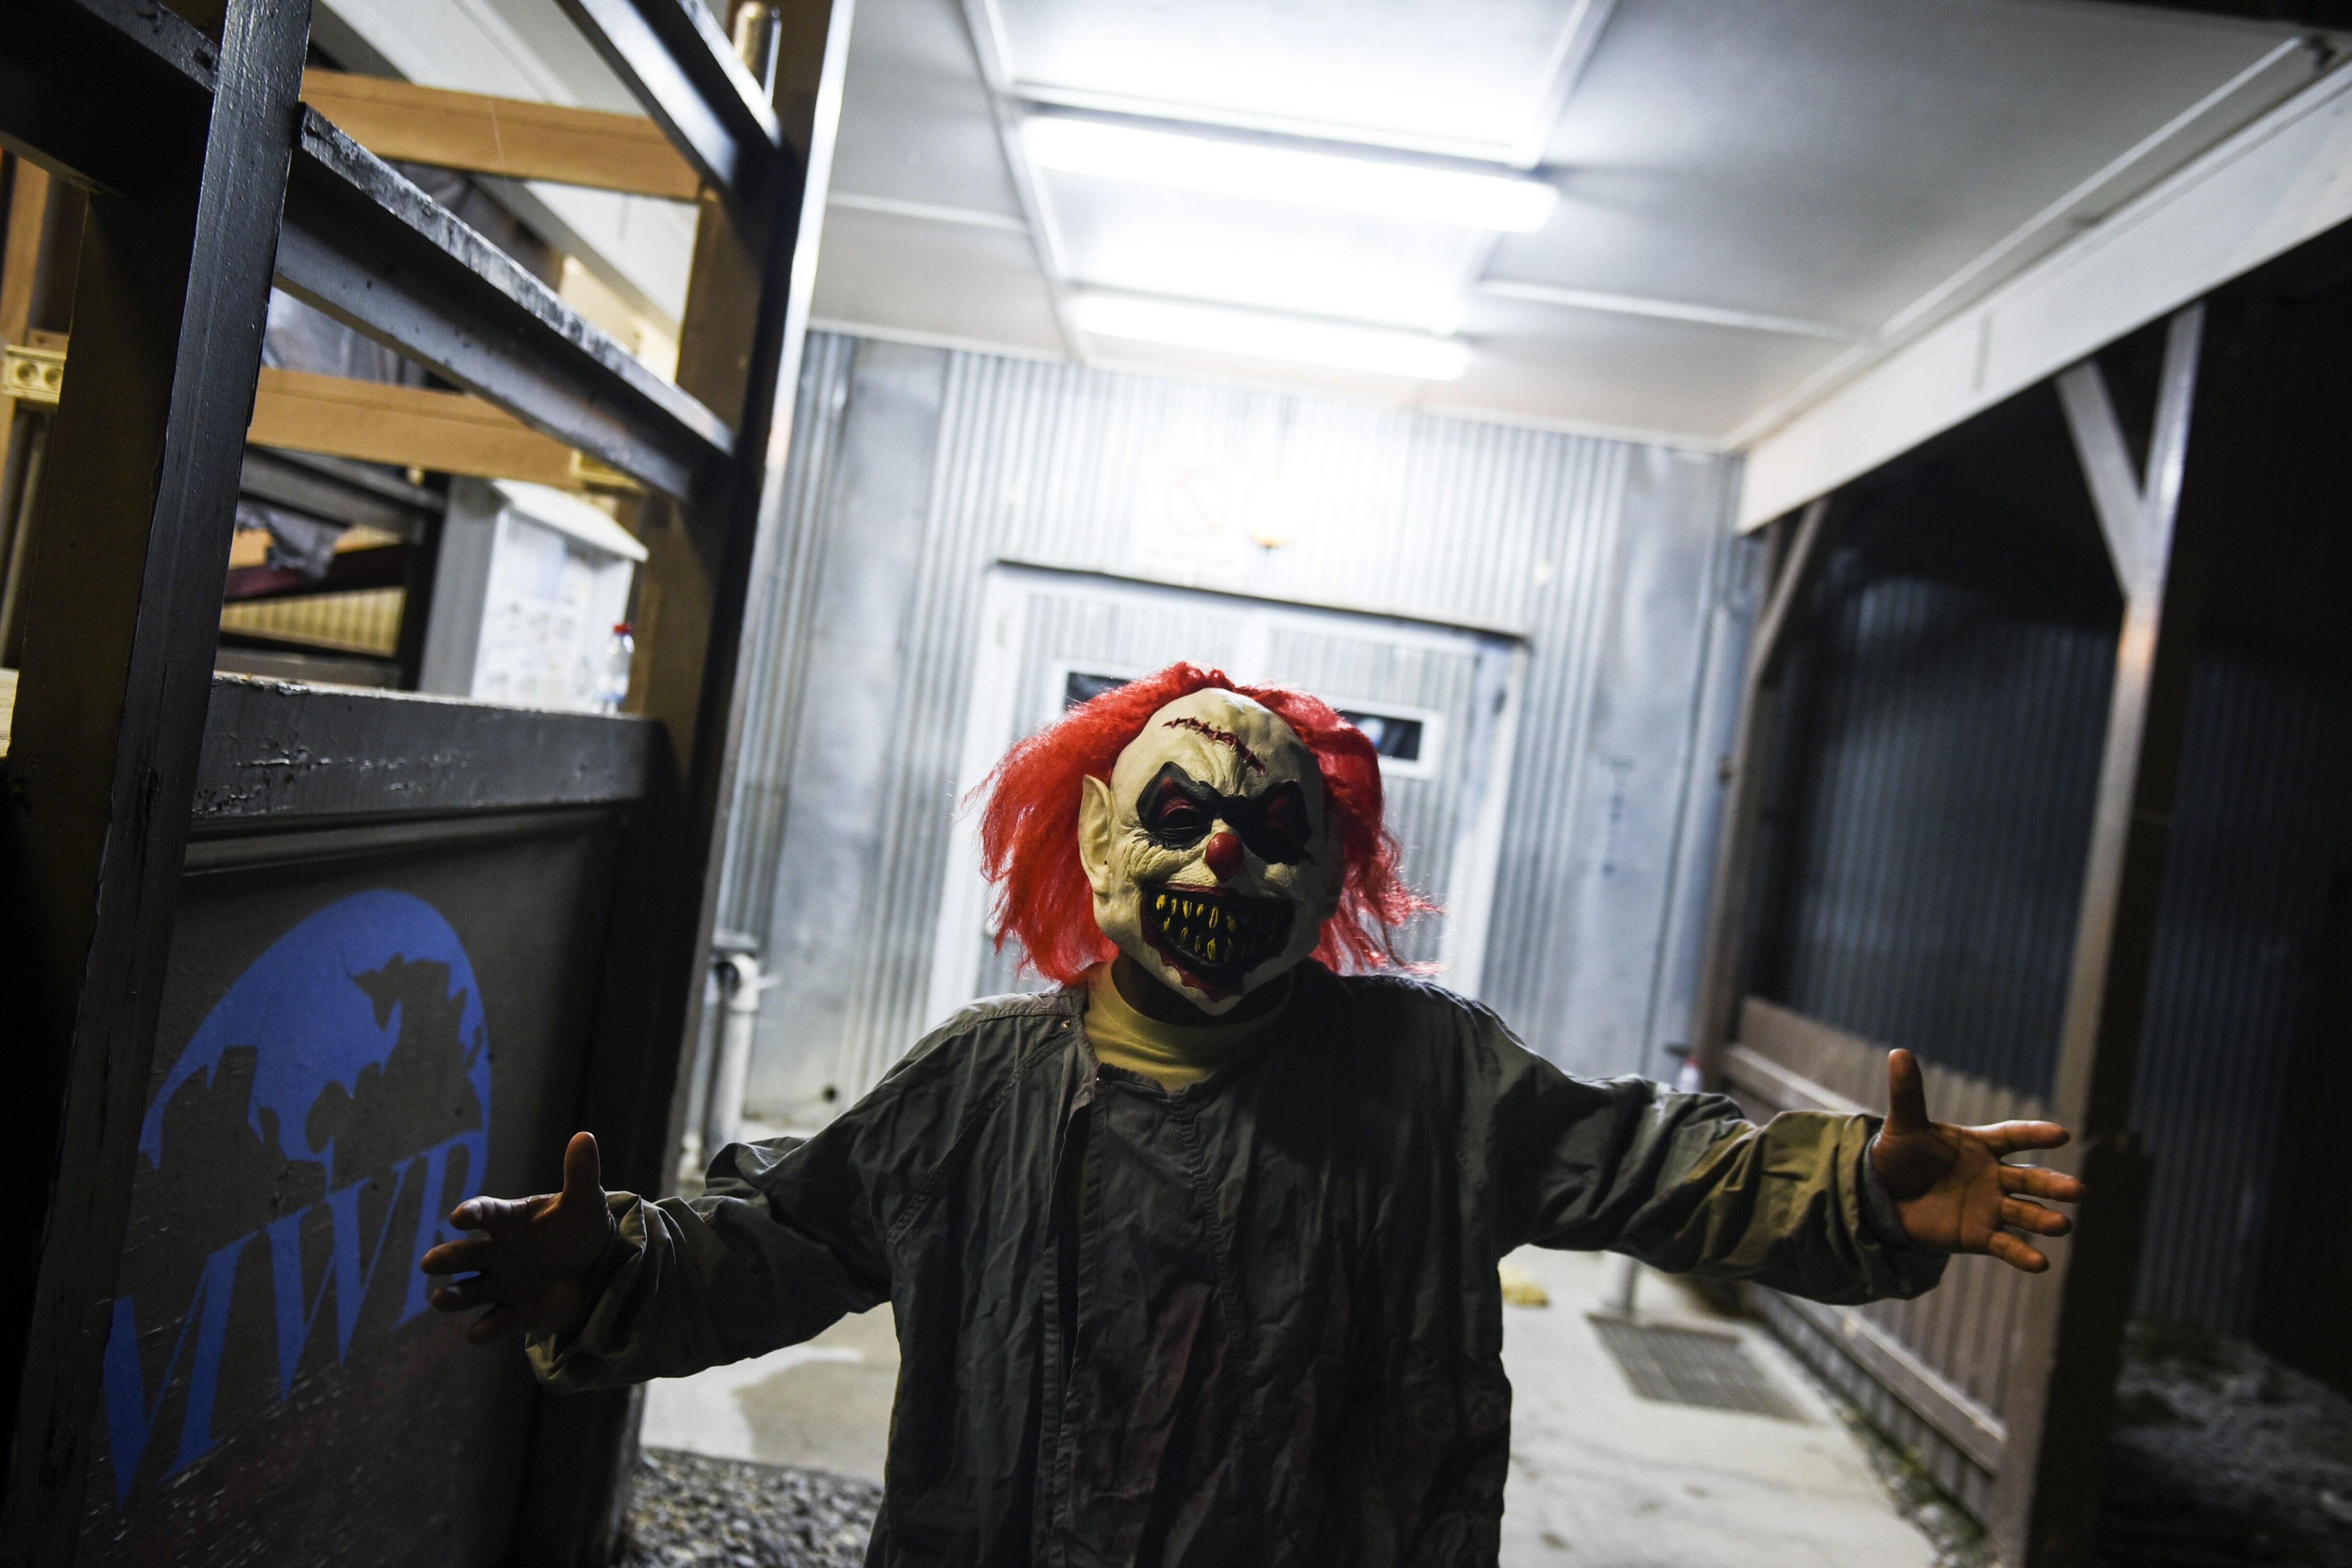 All About the Clown Horror Movie That's Making People Pass Out, Vomit